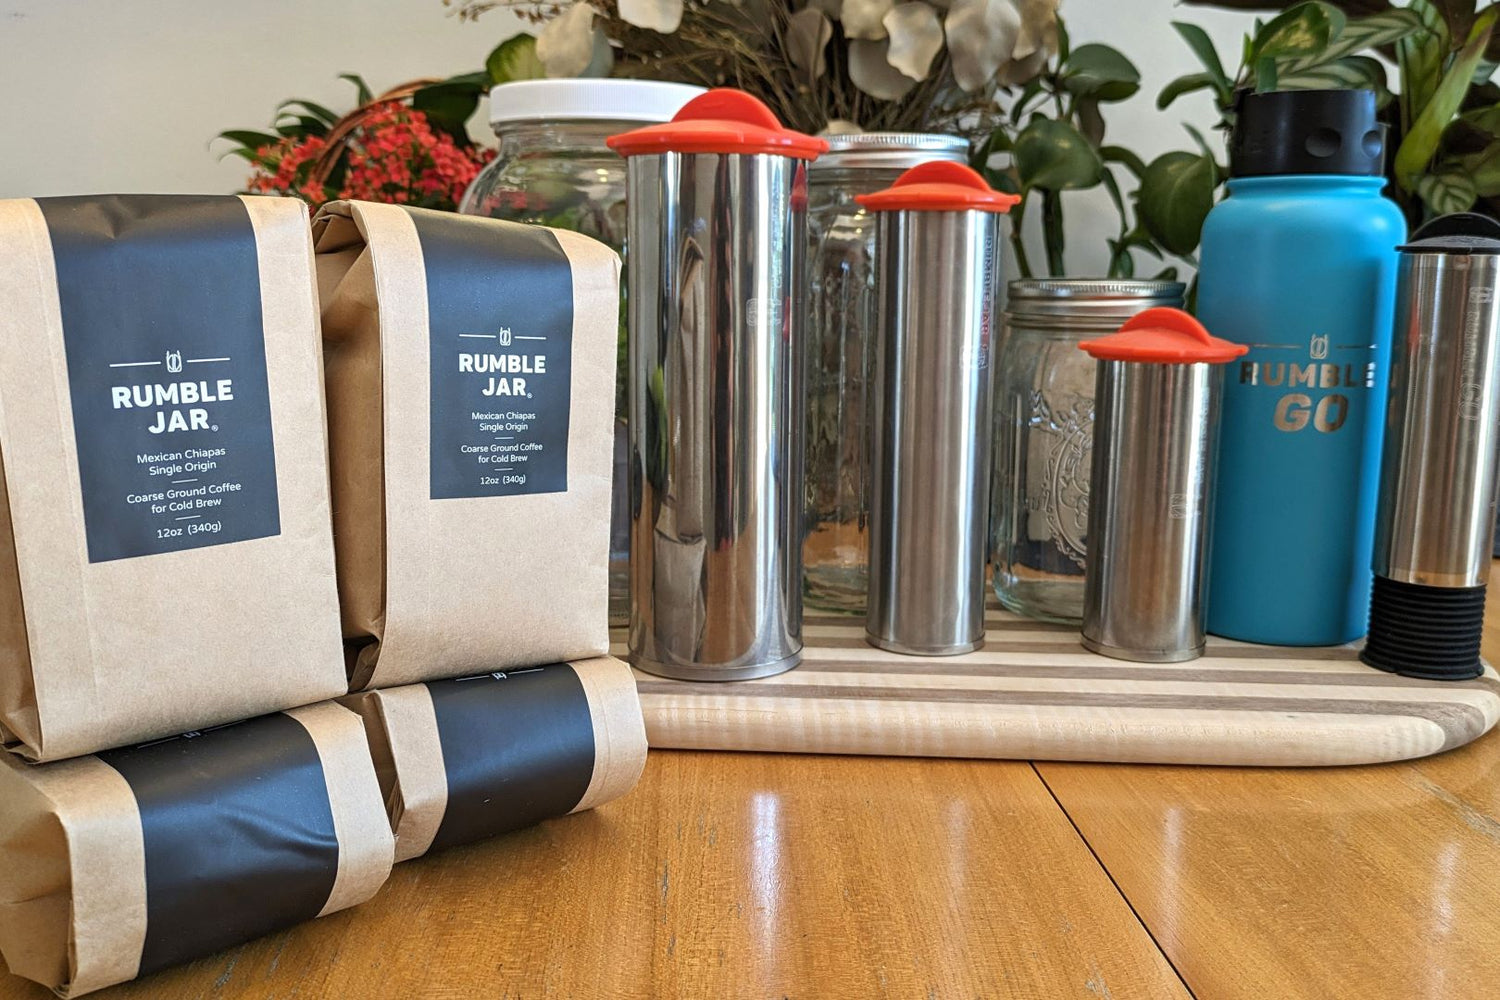 Rumble Jar Coarse Ground Coffee for cold brew with the Rumble Jar filter family